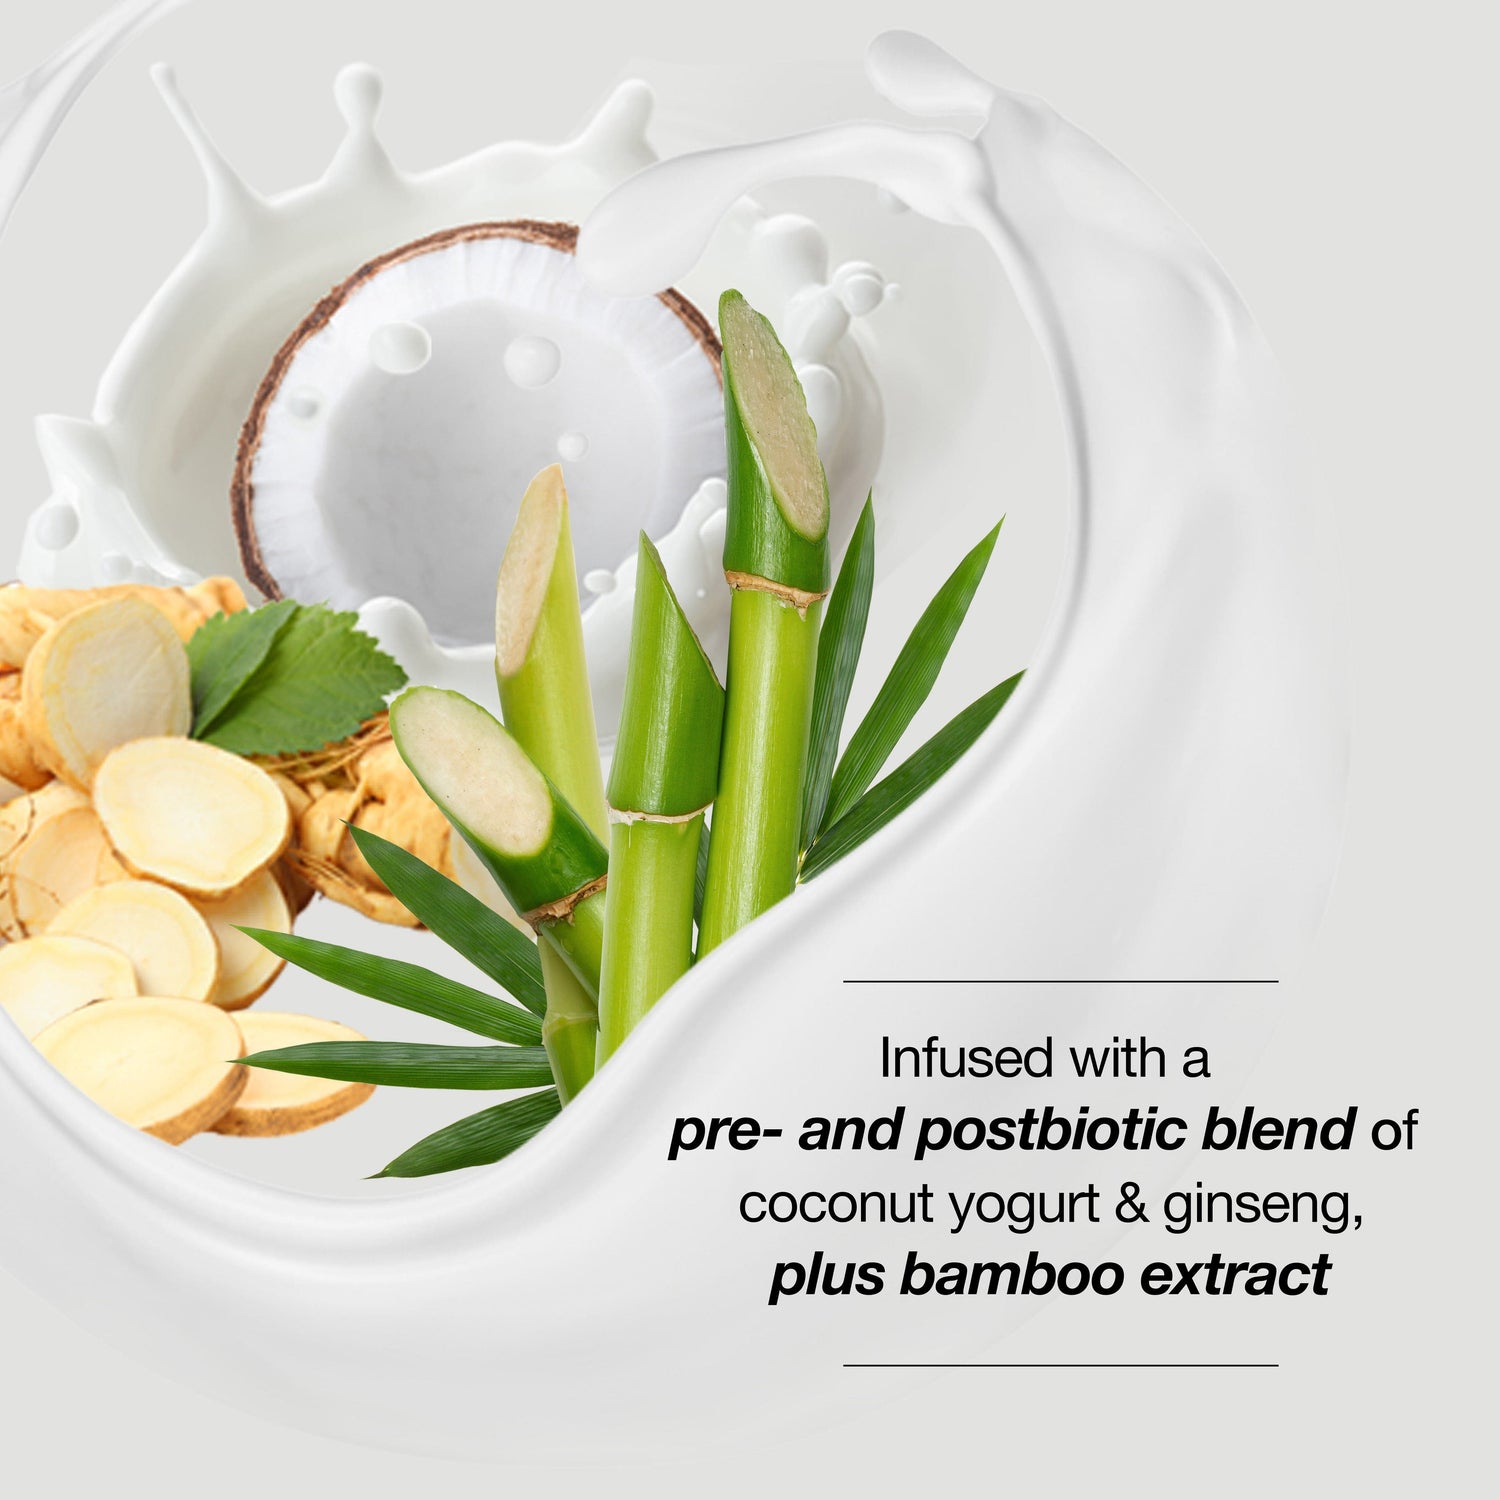 Biotera mousse is infused with a pre and post biotic blend of coconut yogurt and ginseng plus bamboo extract